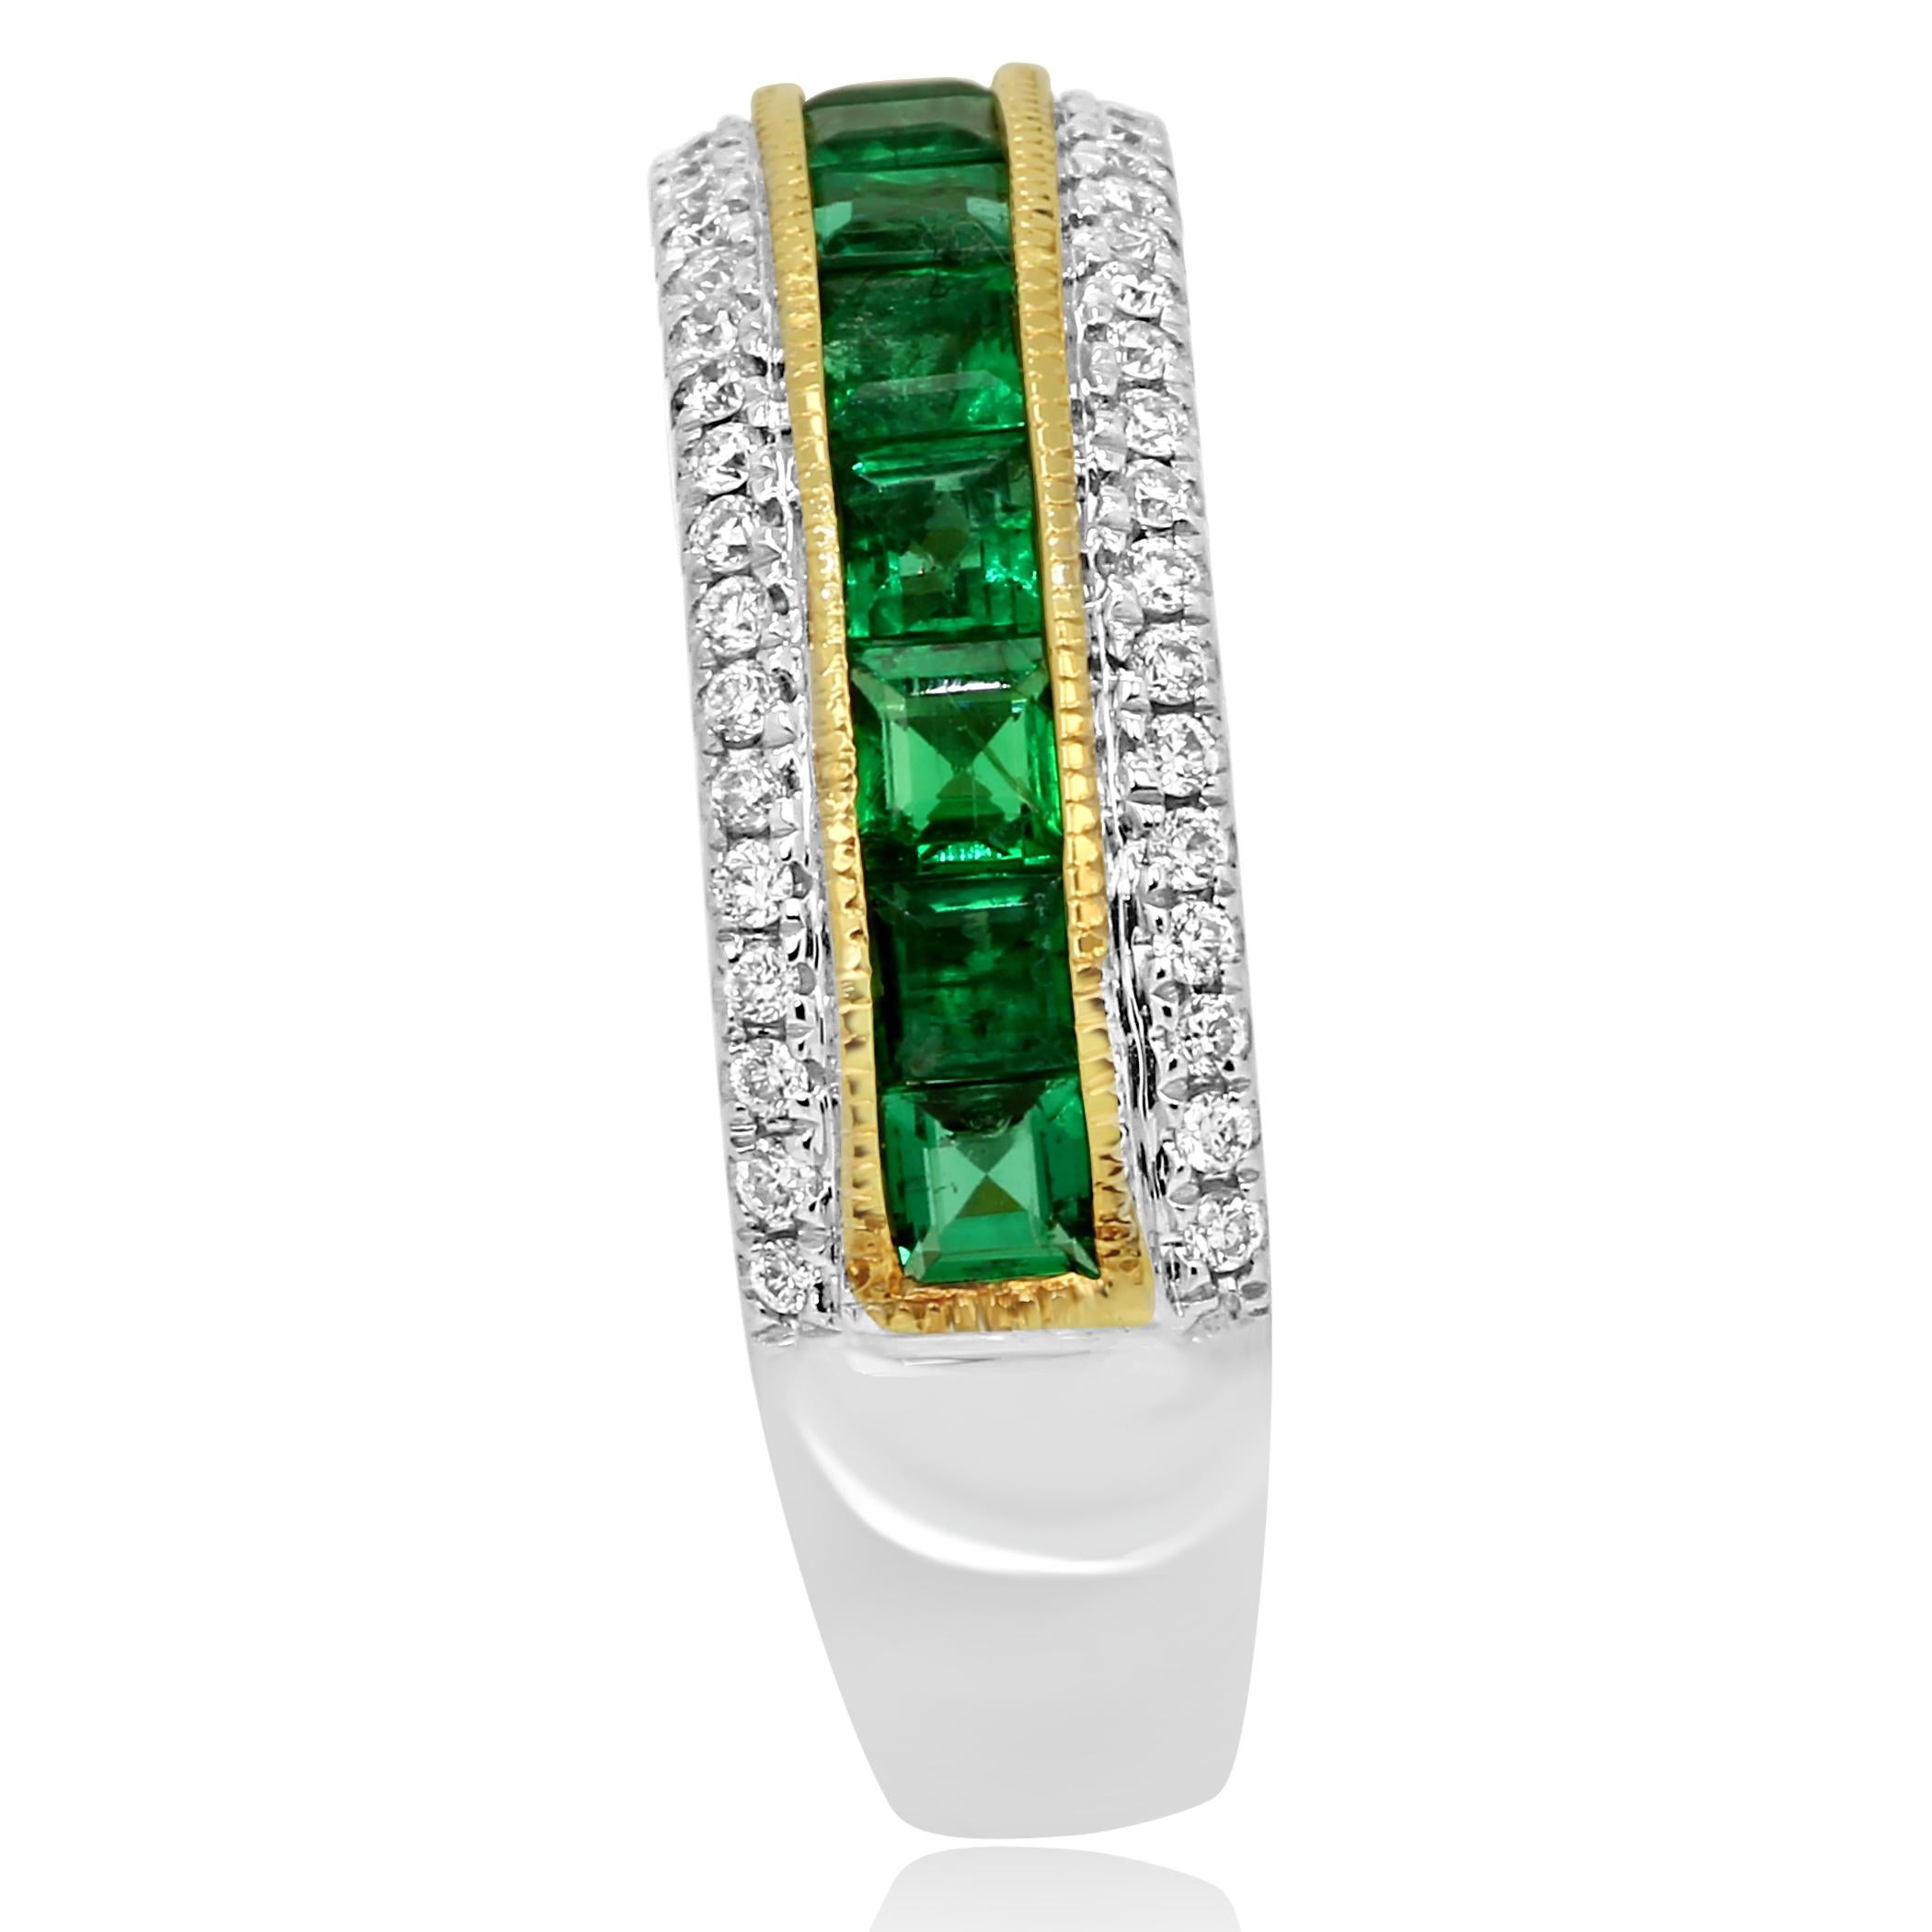 Princess Cut Emerald Diamond Three-Row Channel Set Two-Color Gold Fashion Cocktail Band Ring